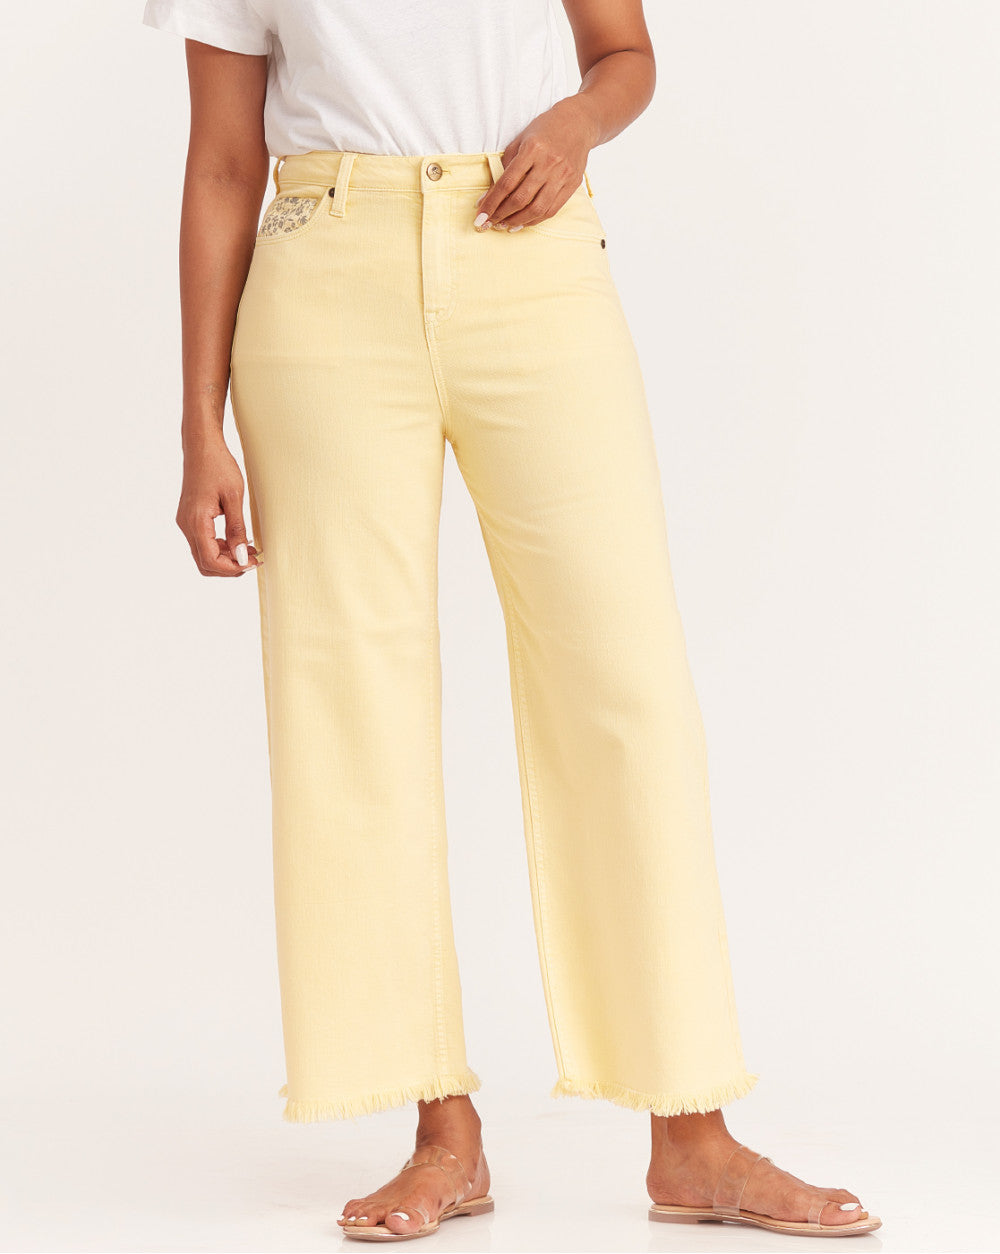 Wide Leg High Waist Colored Jeans - Daffodil Yellow